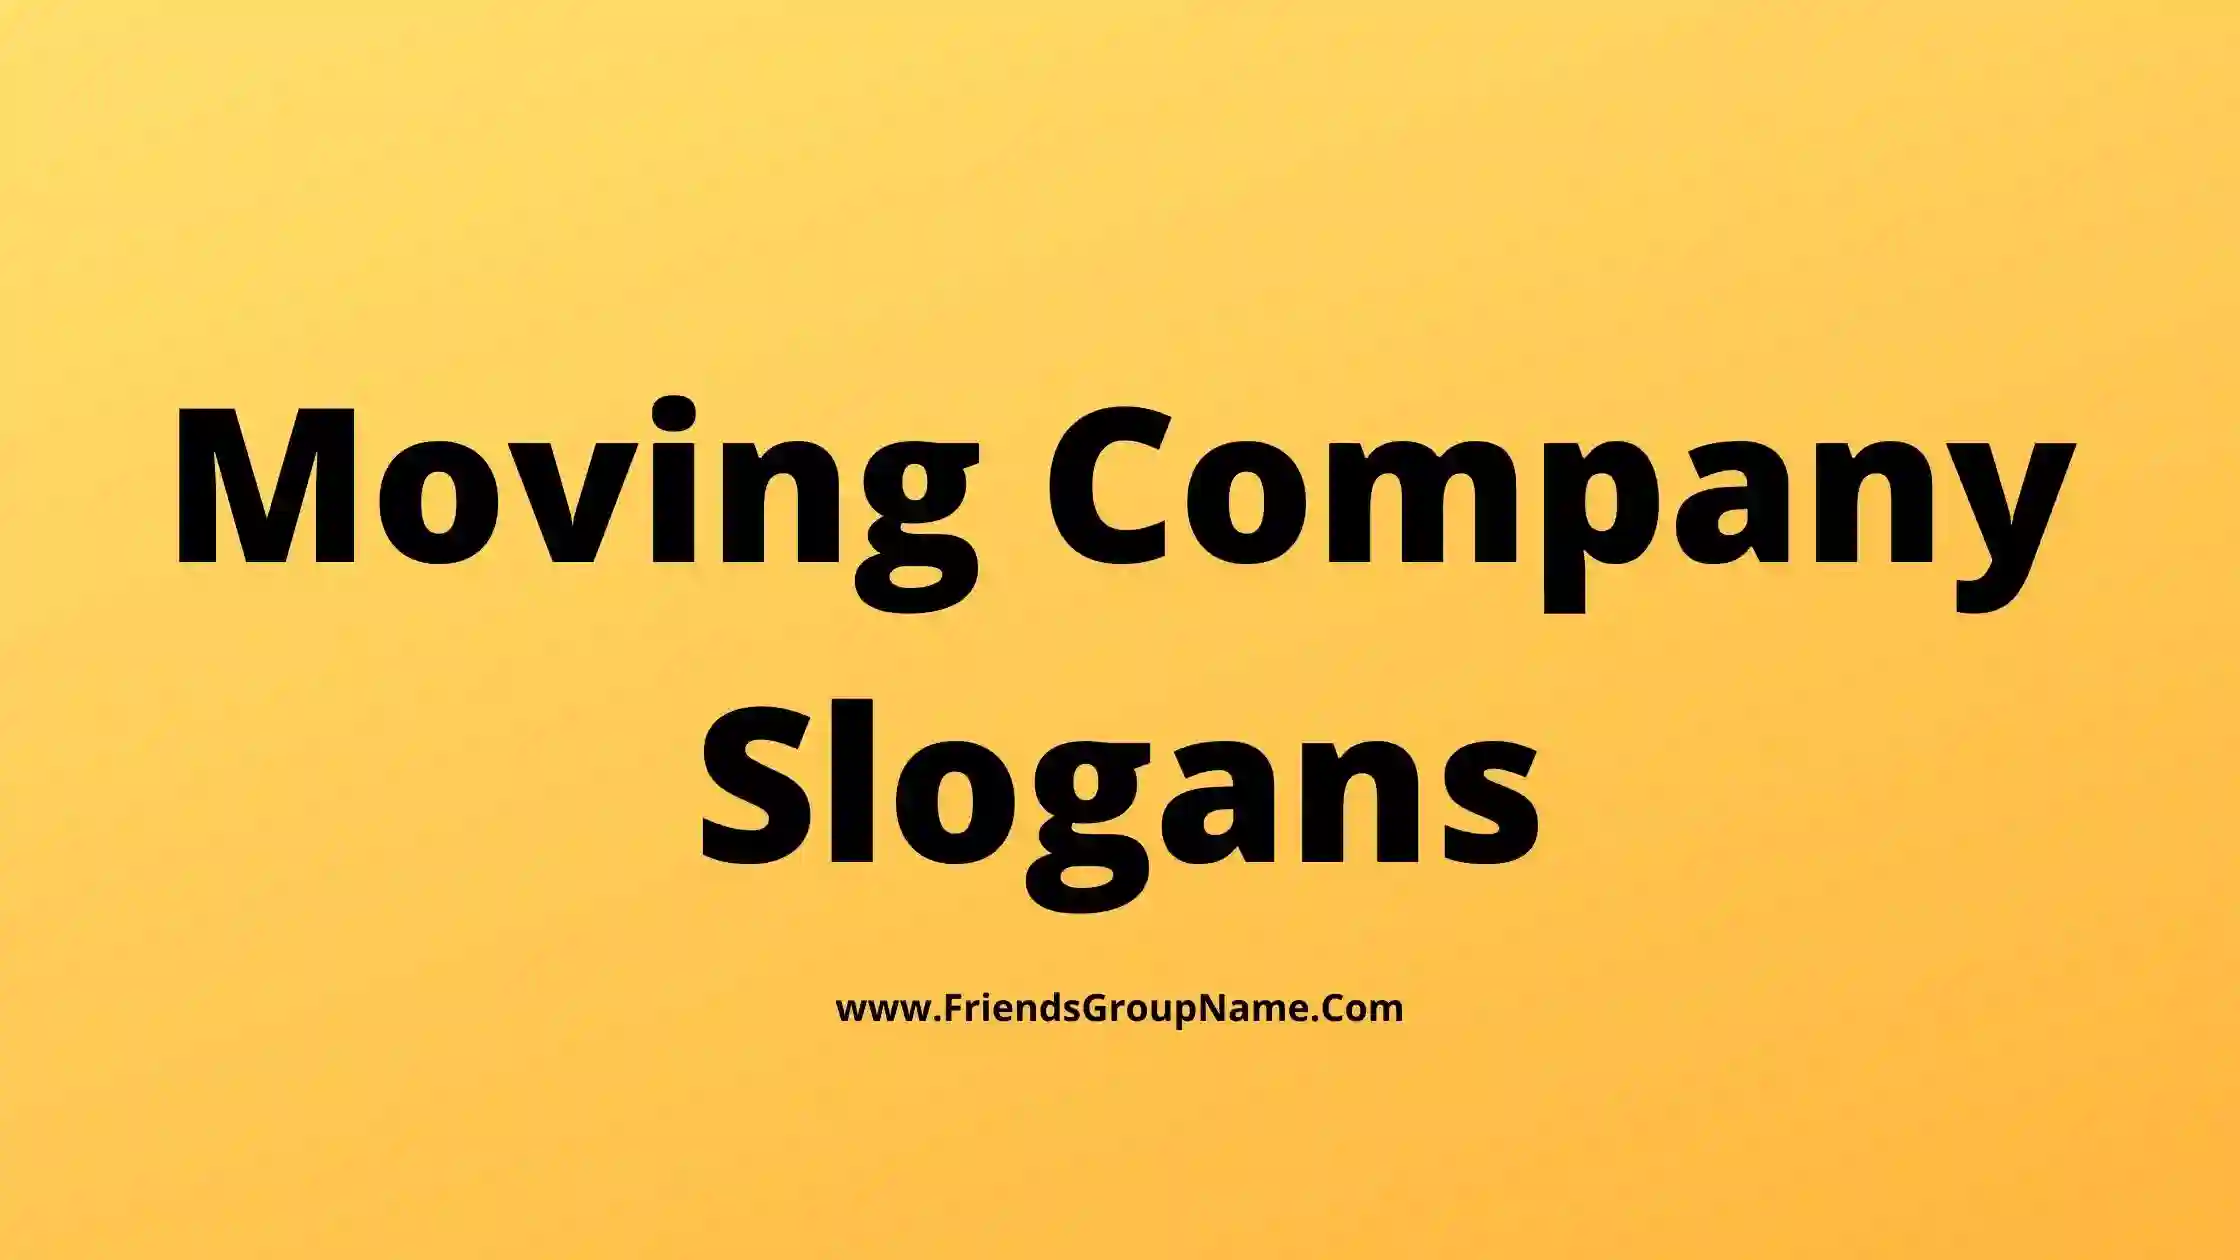 Moving Company Slogans【2023】Funny, Catchy & Clever Moving Company Taglines